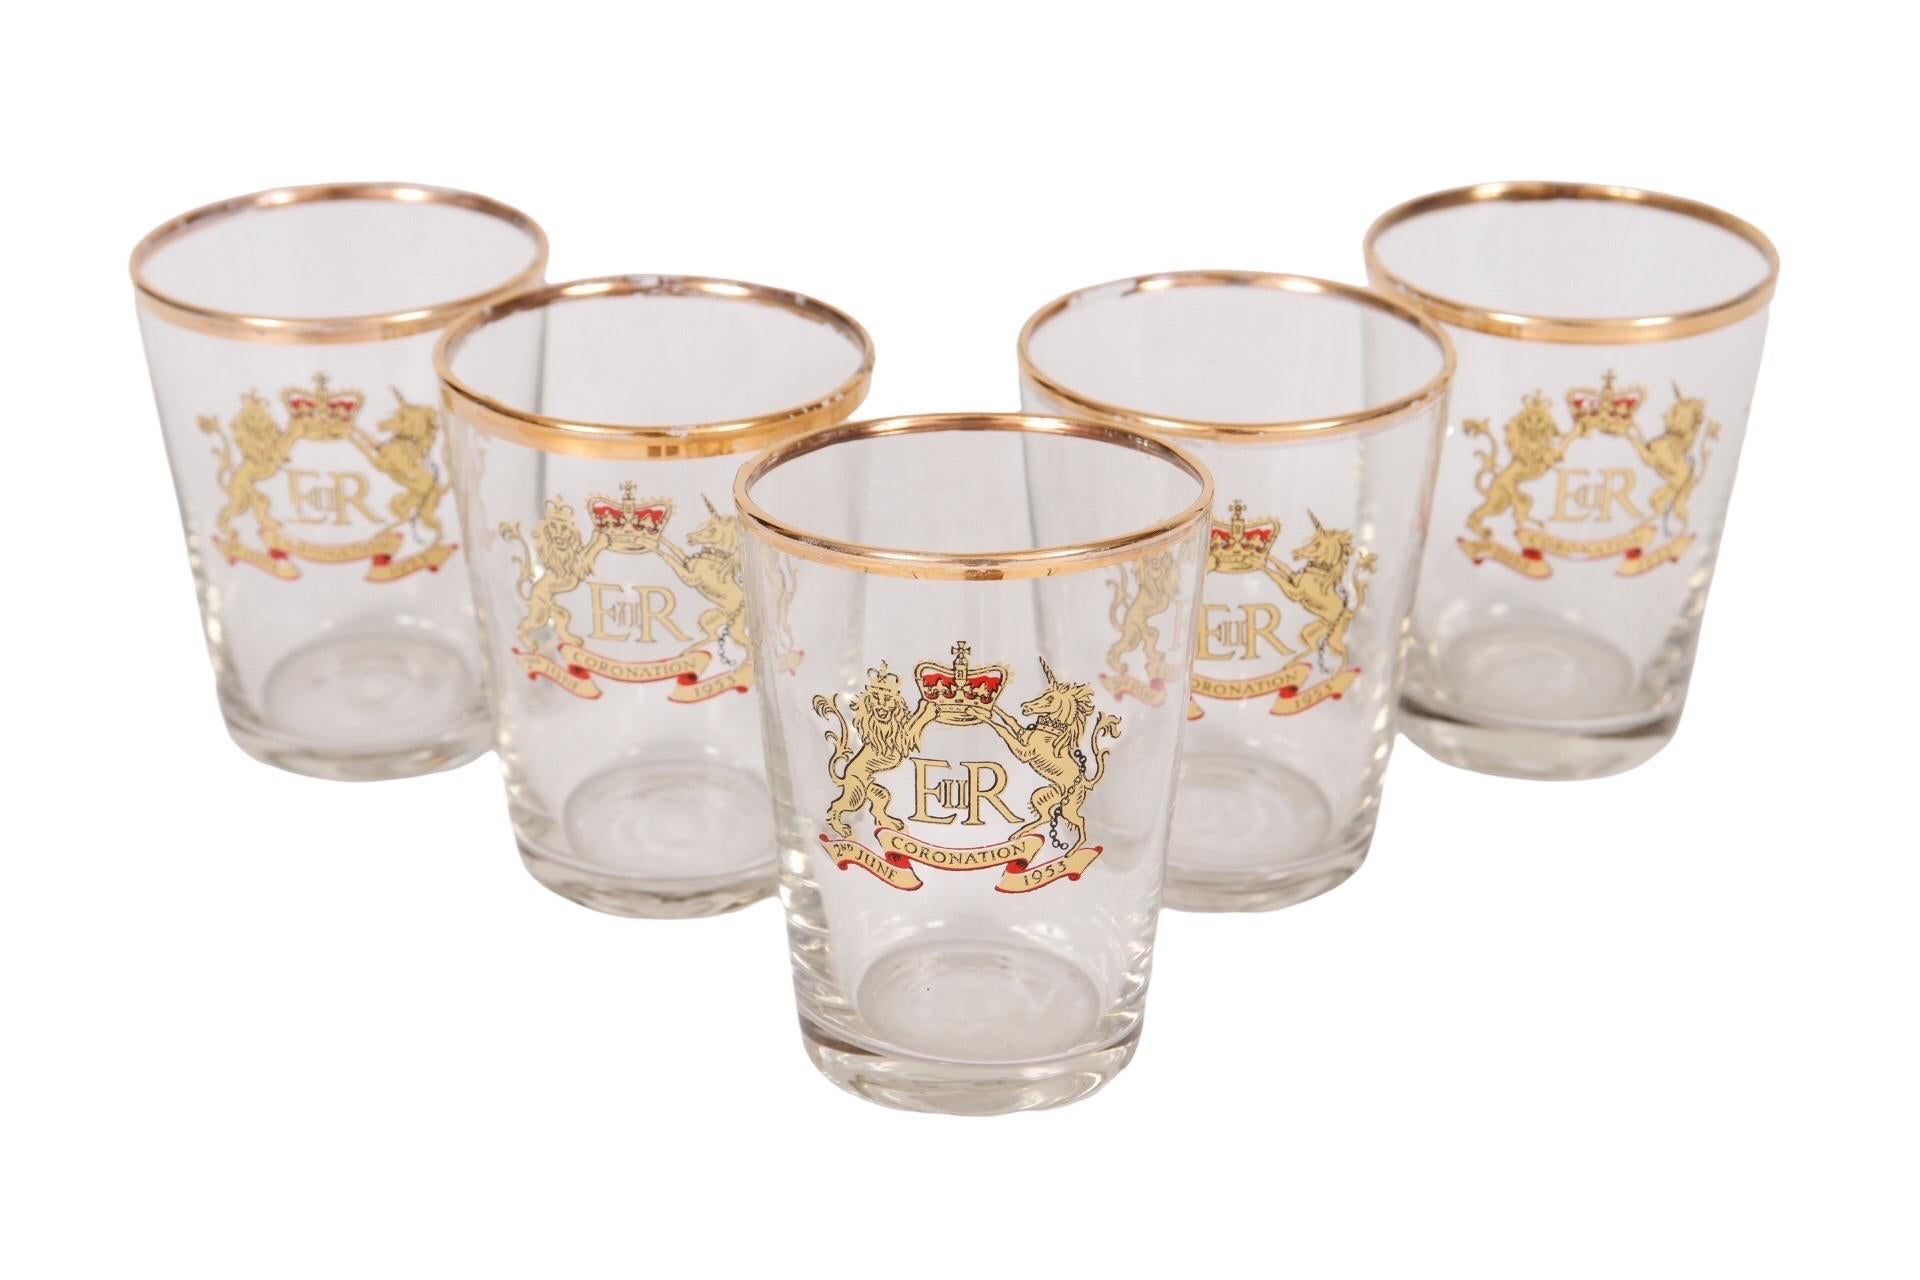 A set of five shot glasses commemorating the coronation of Queen Elizabeth II on June 2nd 1953. Embellished with the Royal coat of arms and a gold rim. Dimensions per glass.